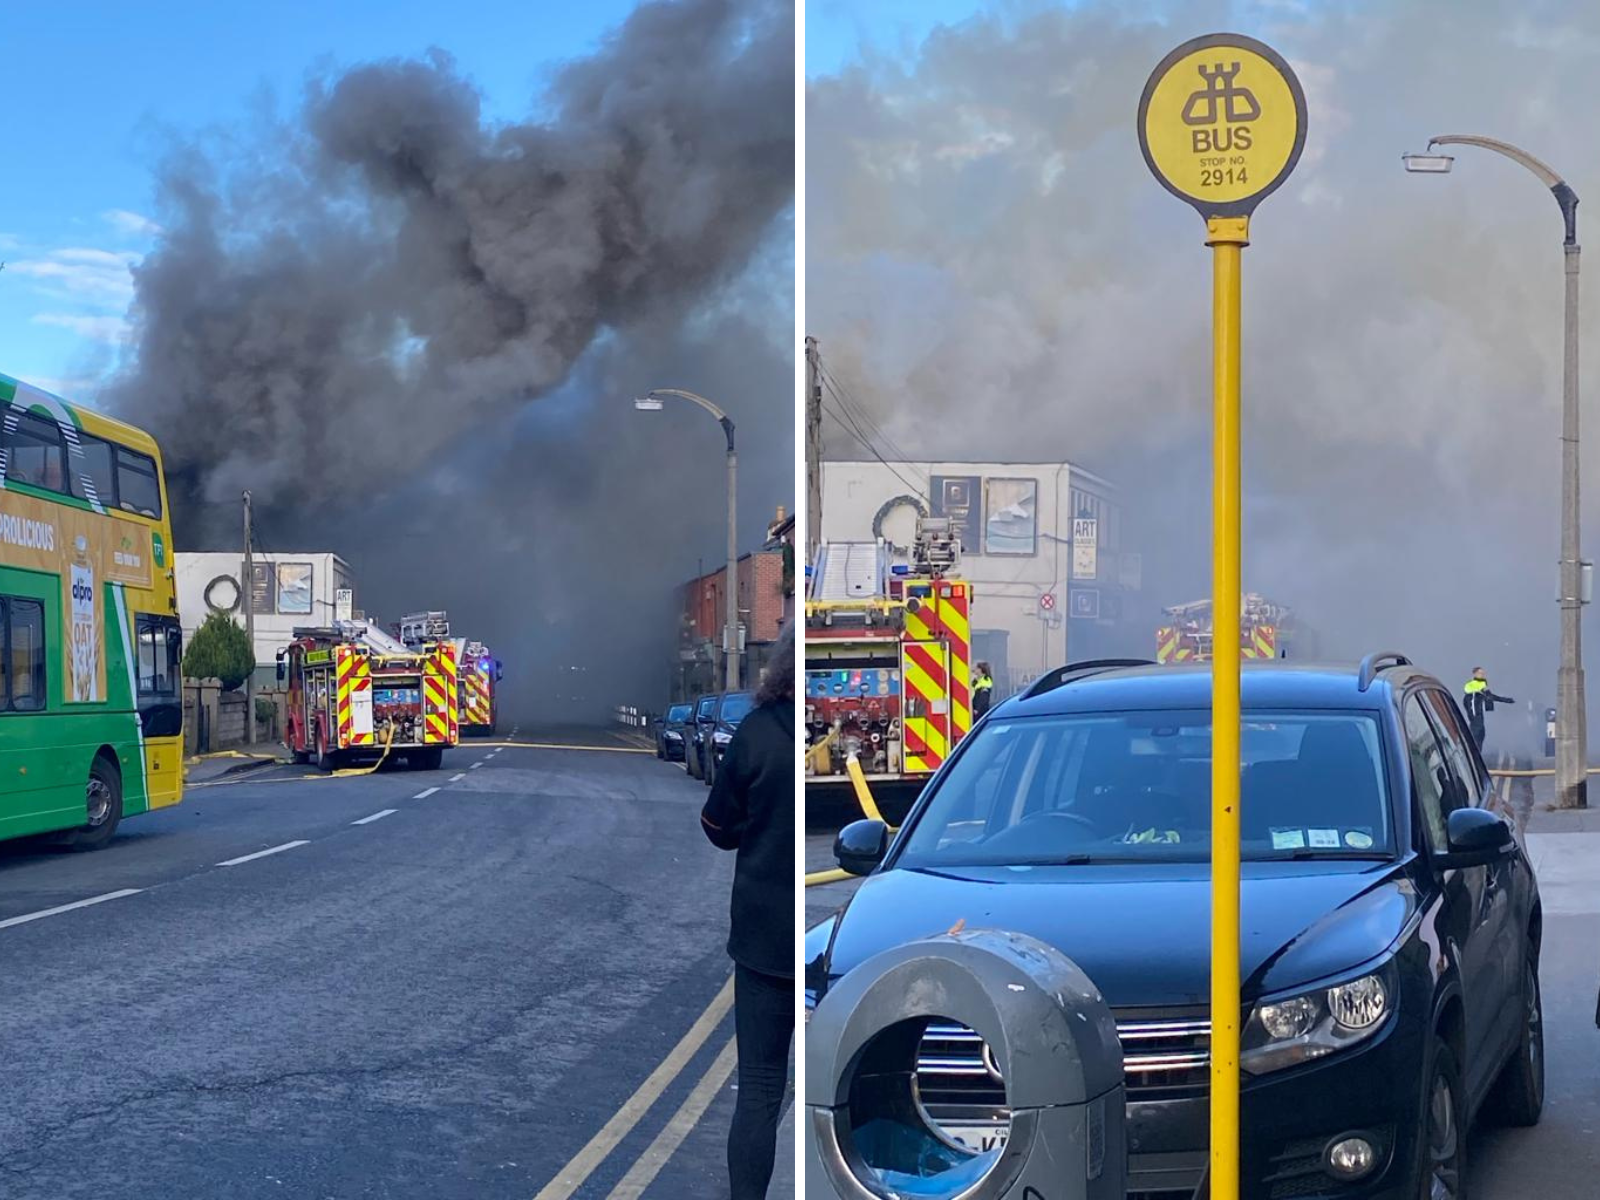 Emergency services at the scene of a major fire in Rathgar in Dublin